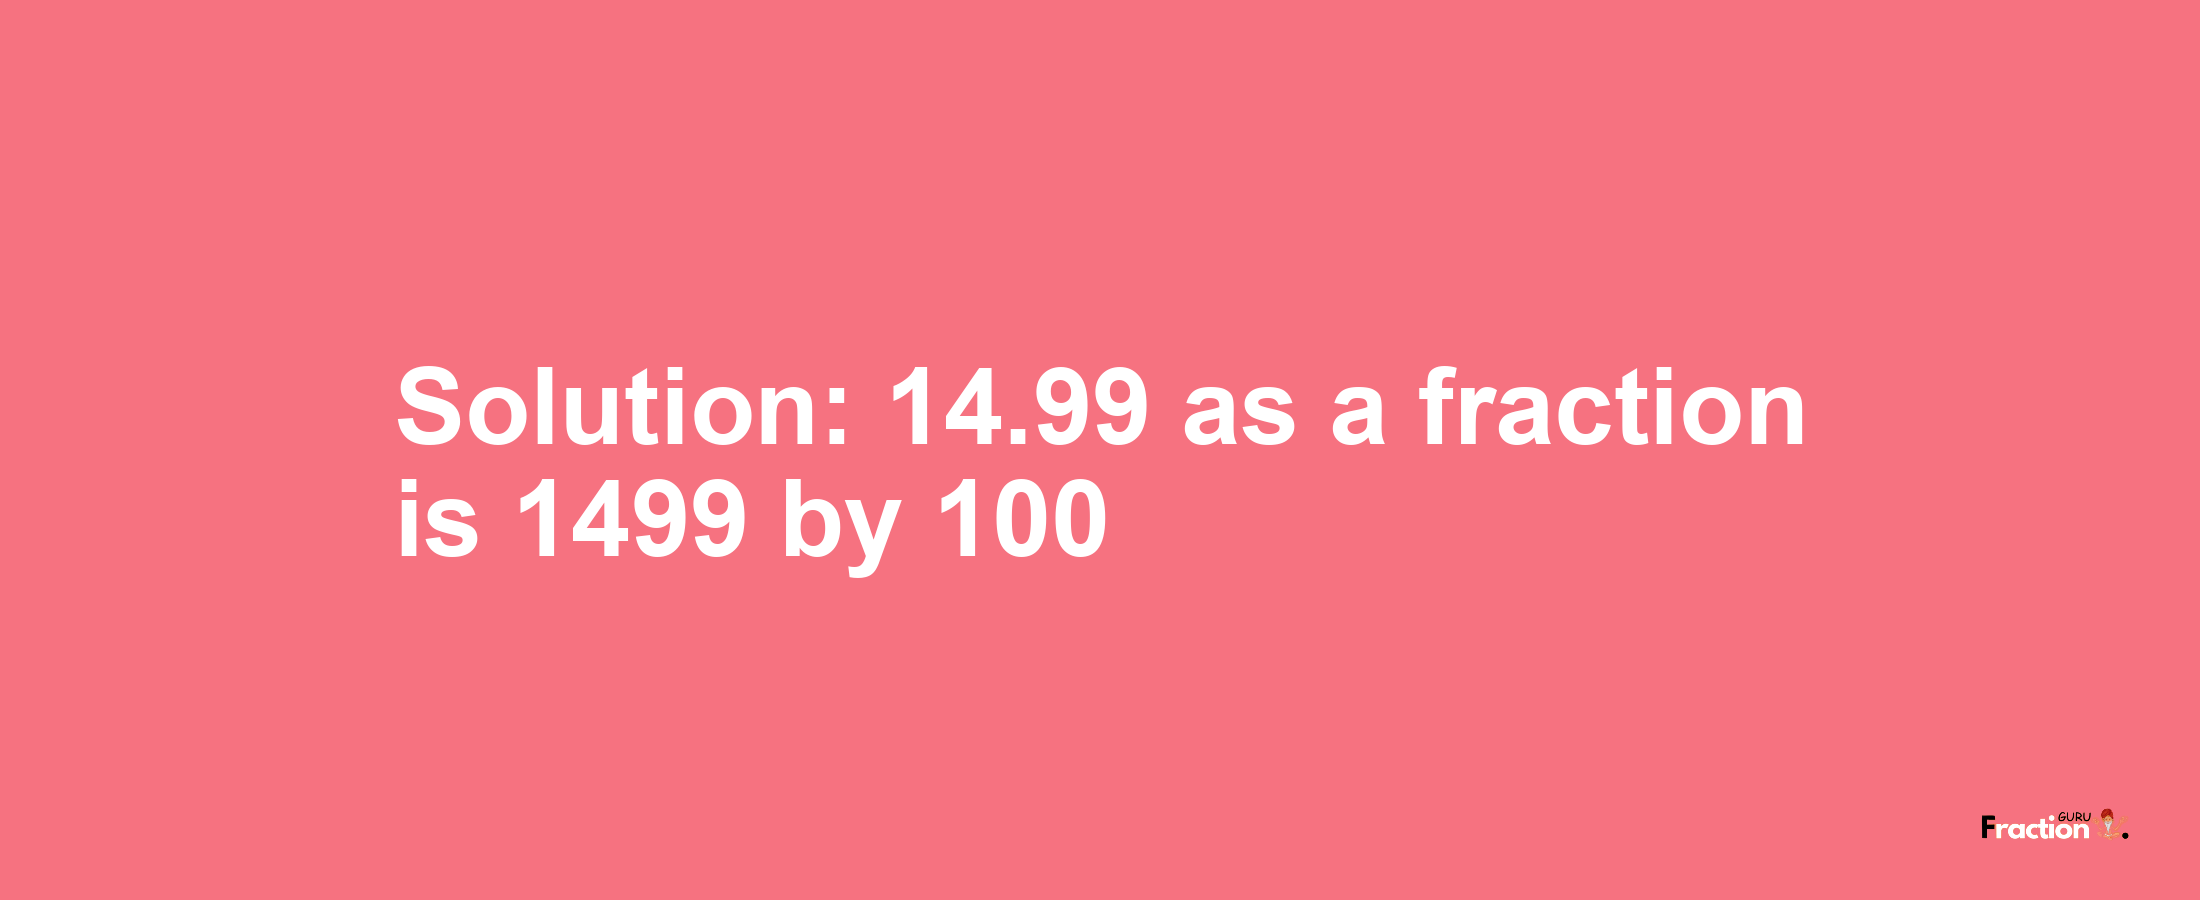 Solution:14.99 as a fraction is 1499/100